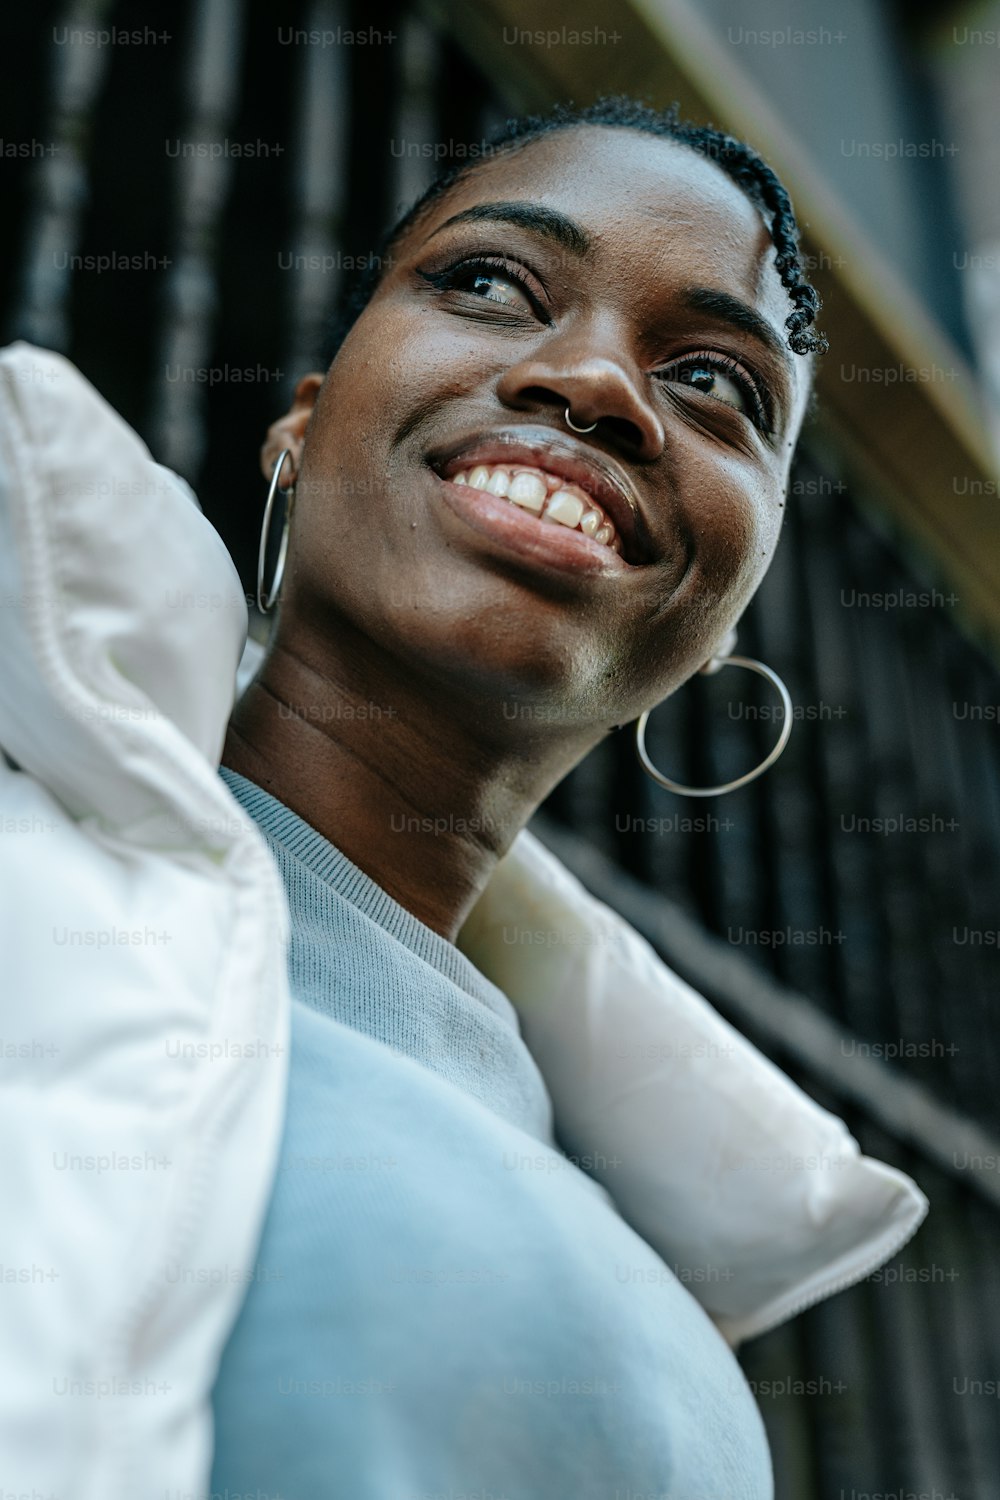 a woman with large hoop earrings smiles at the camera